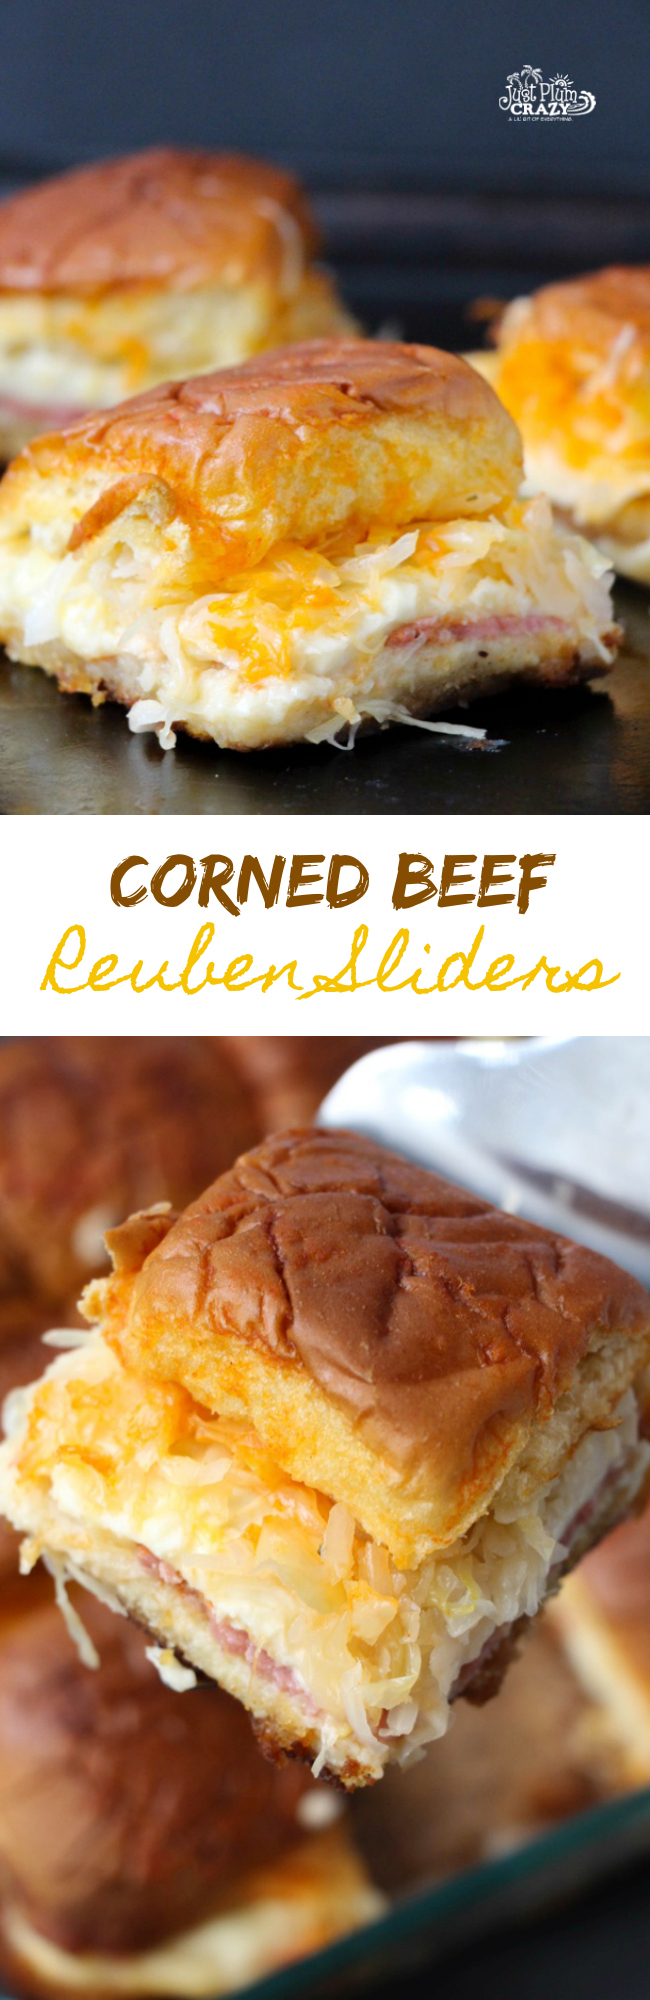 Since I don't have a pastrami sandwich recipe, we are sharing a Corned Beef Reuben Sliders recipe which you can also use for other holidays besides St. Patrick's Day like the big game coming up in a couple of weeks or even a summer picnic | PlumCrazyAboutCoupons.com